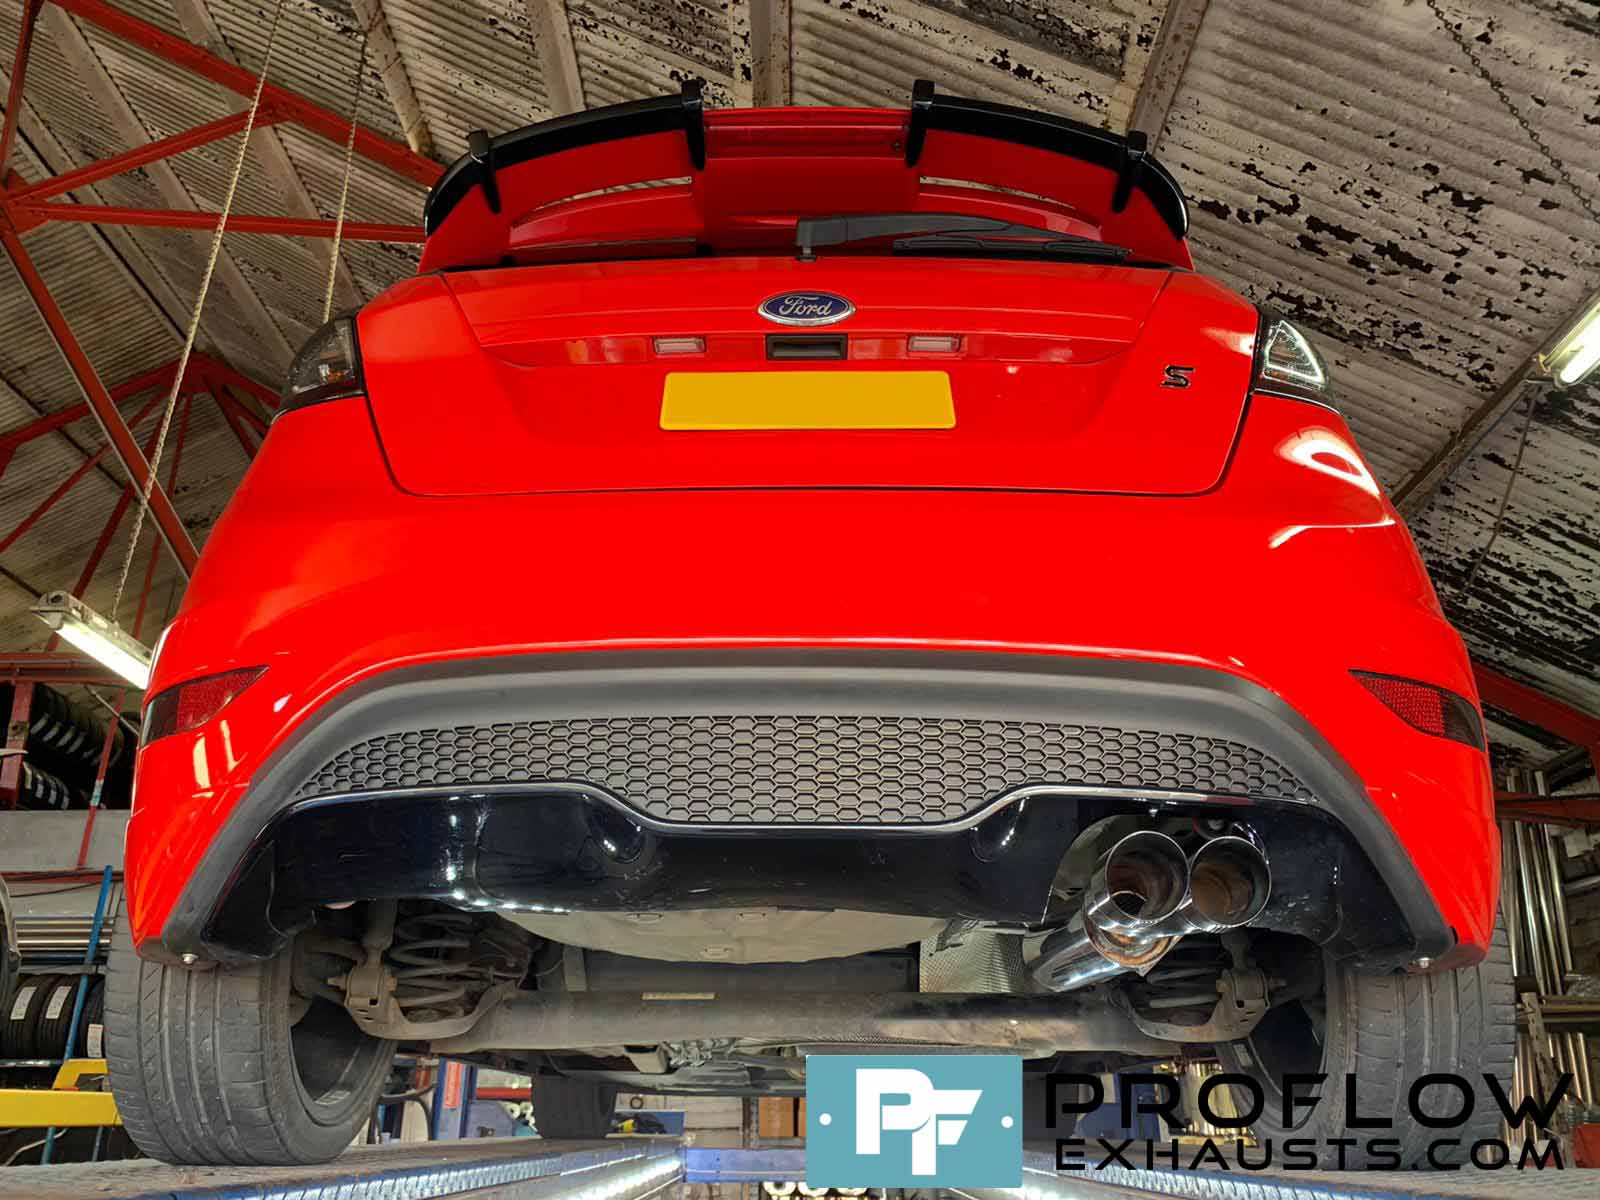 Proflow Exhausts Custom Built Back Box and Twin Tailpipe for Ford Focus